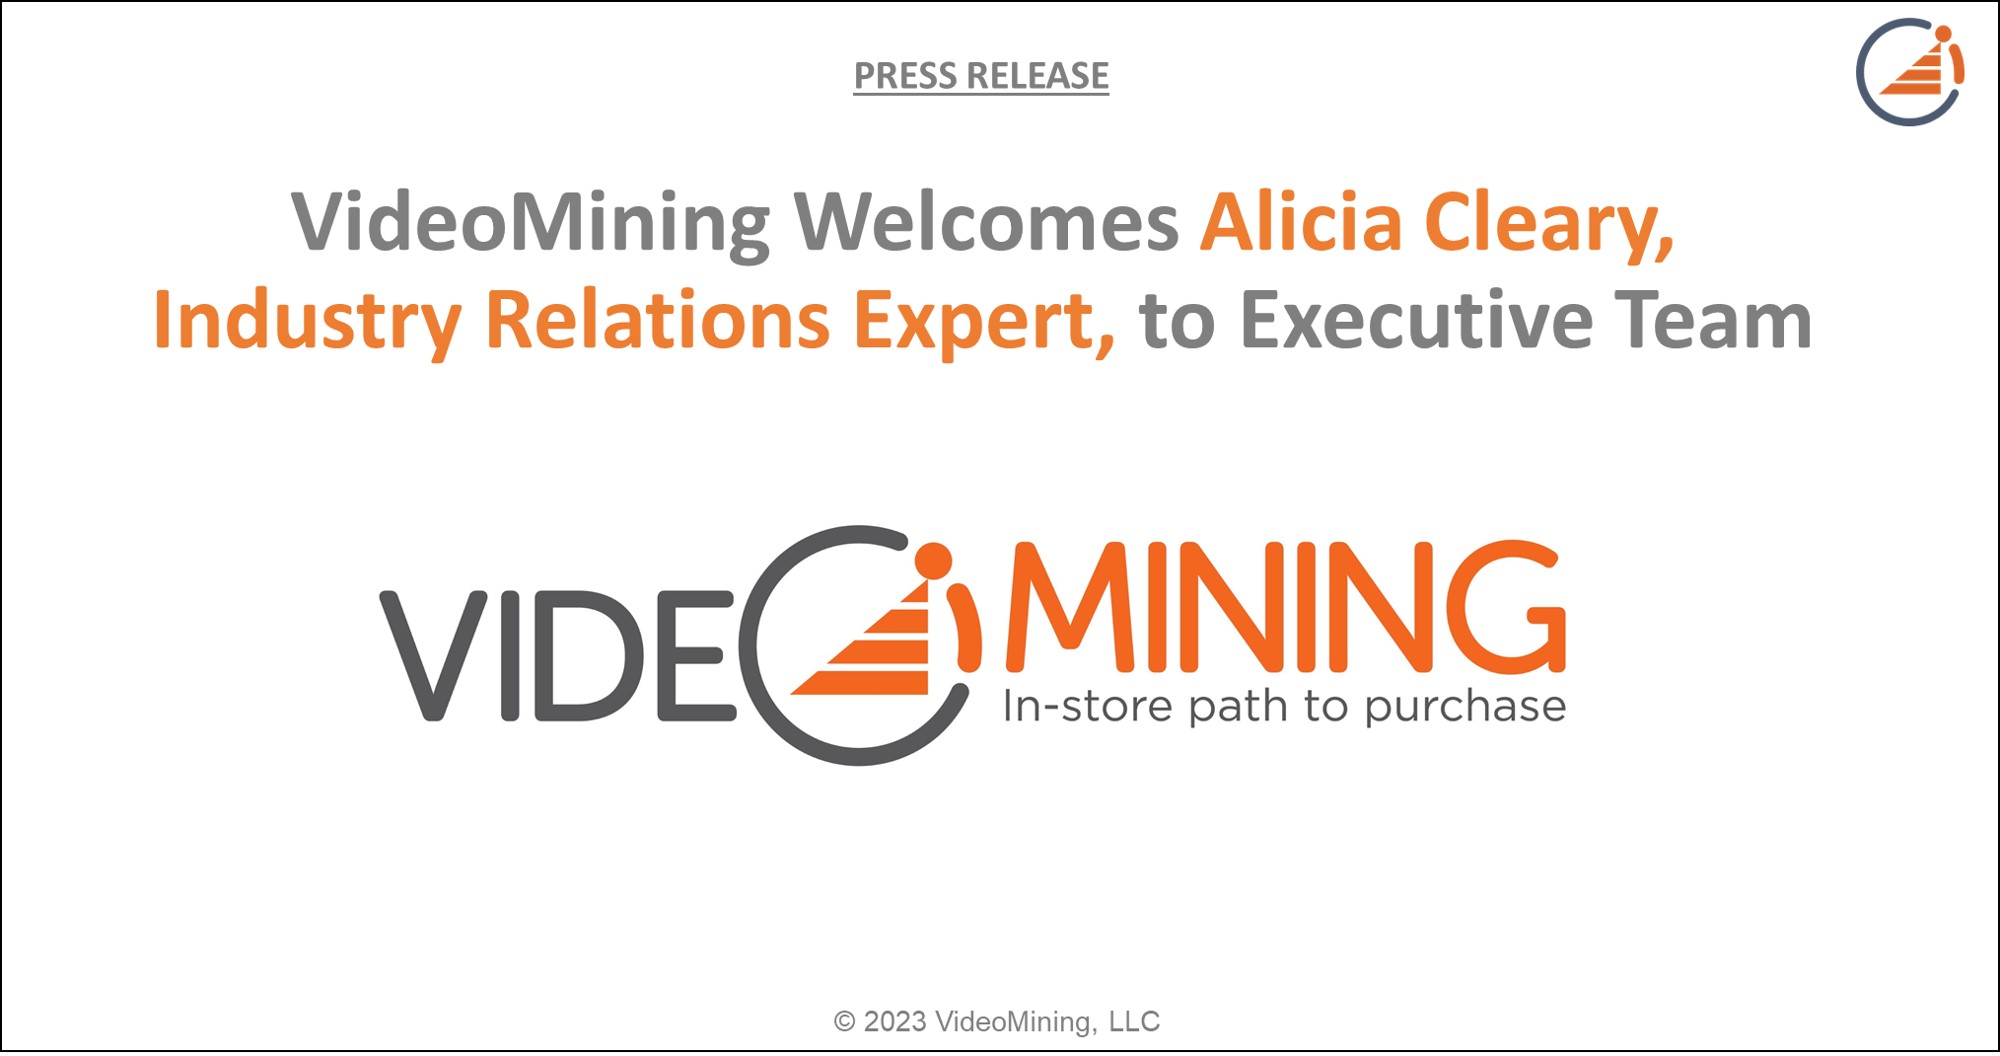 VideoMining Welcomes Alicia Cleary to Executive Team